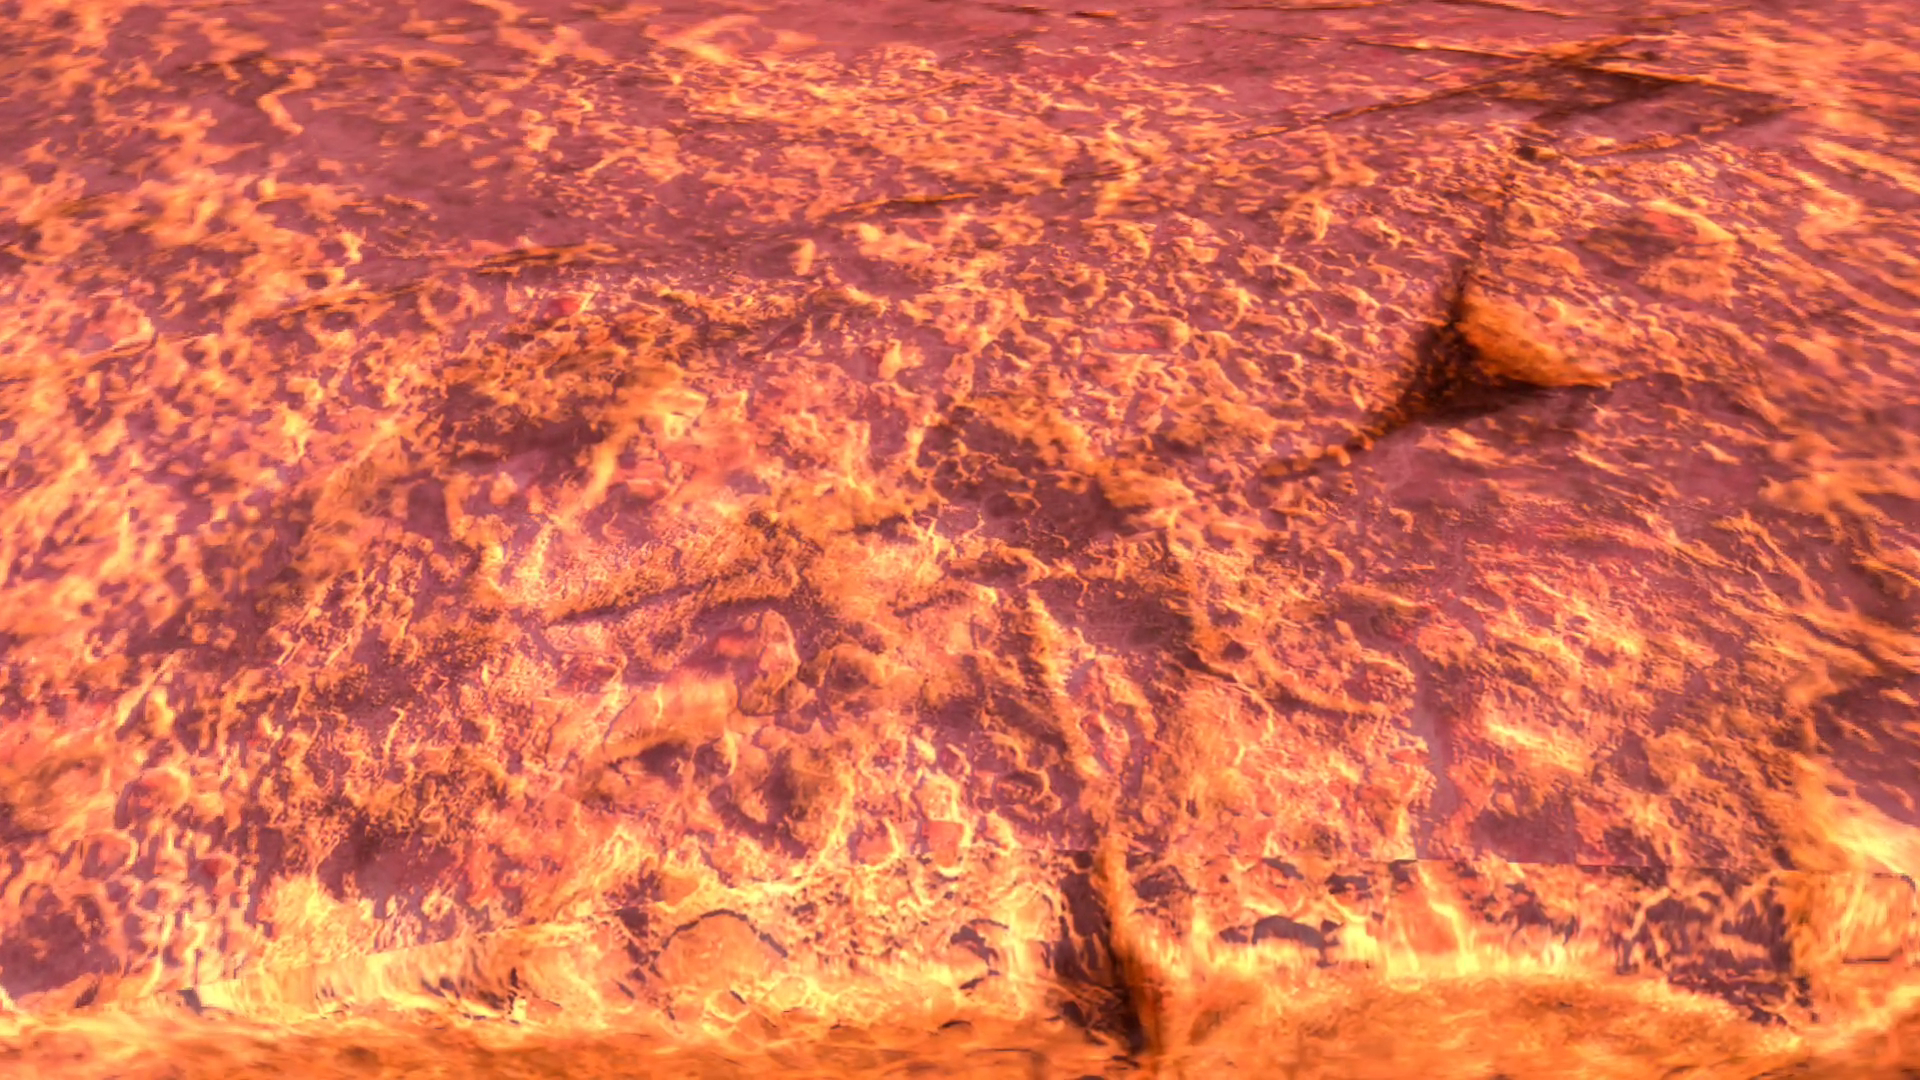 Screenshots of upgraded rock textures in Asgard's Wrath 2 on a Meta Quest 3